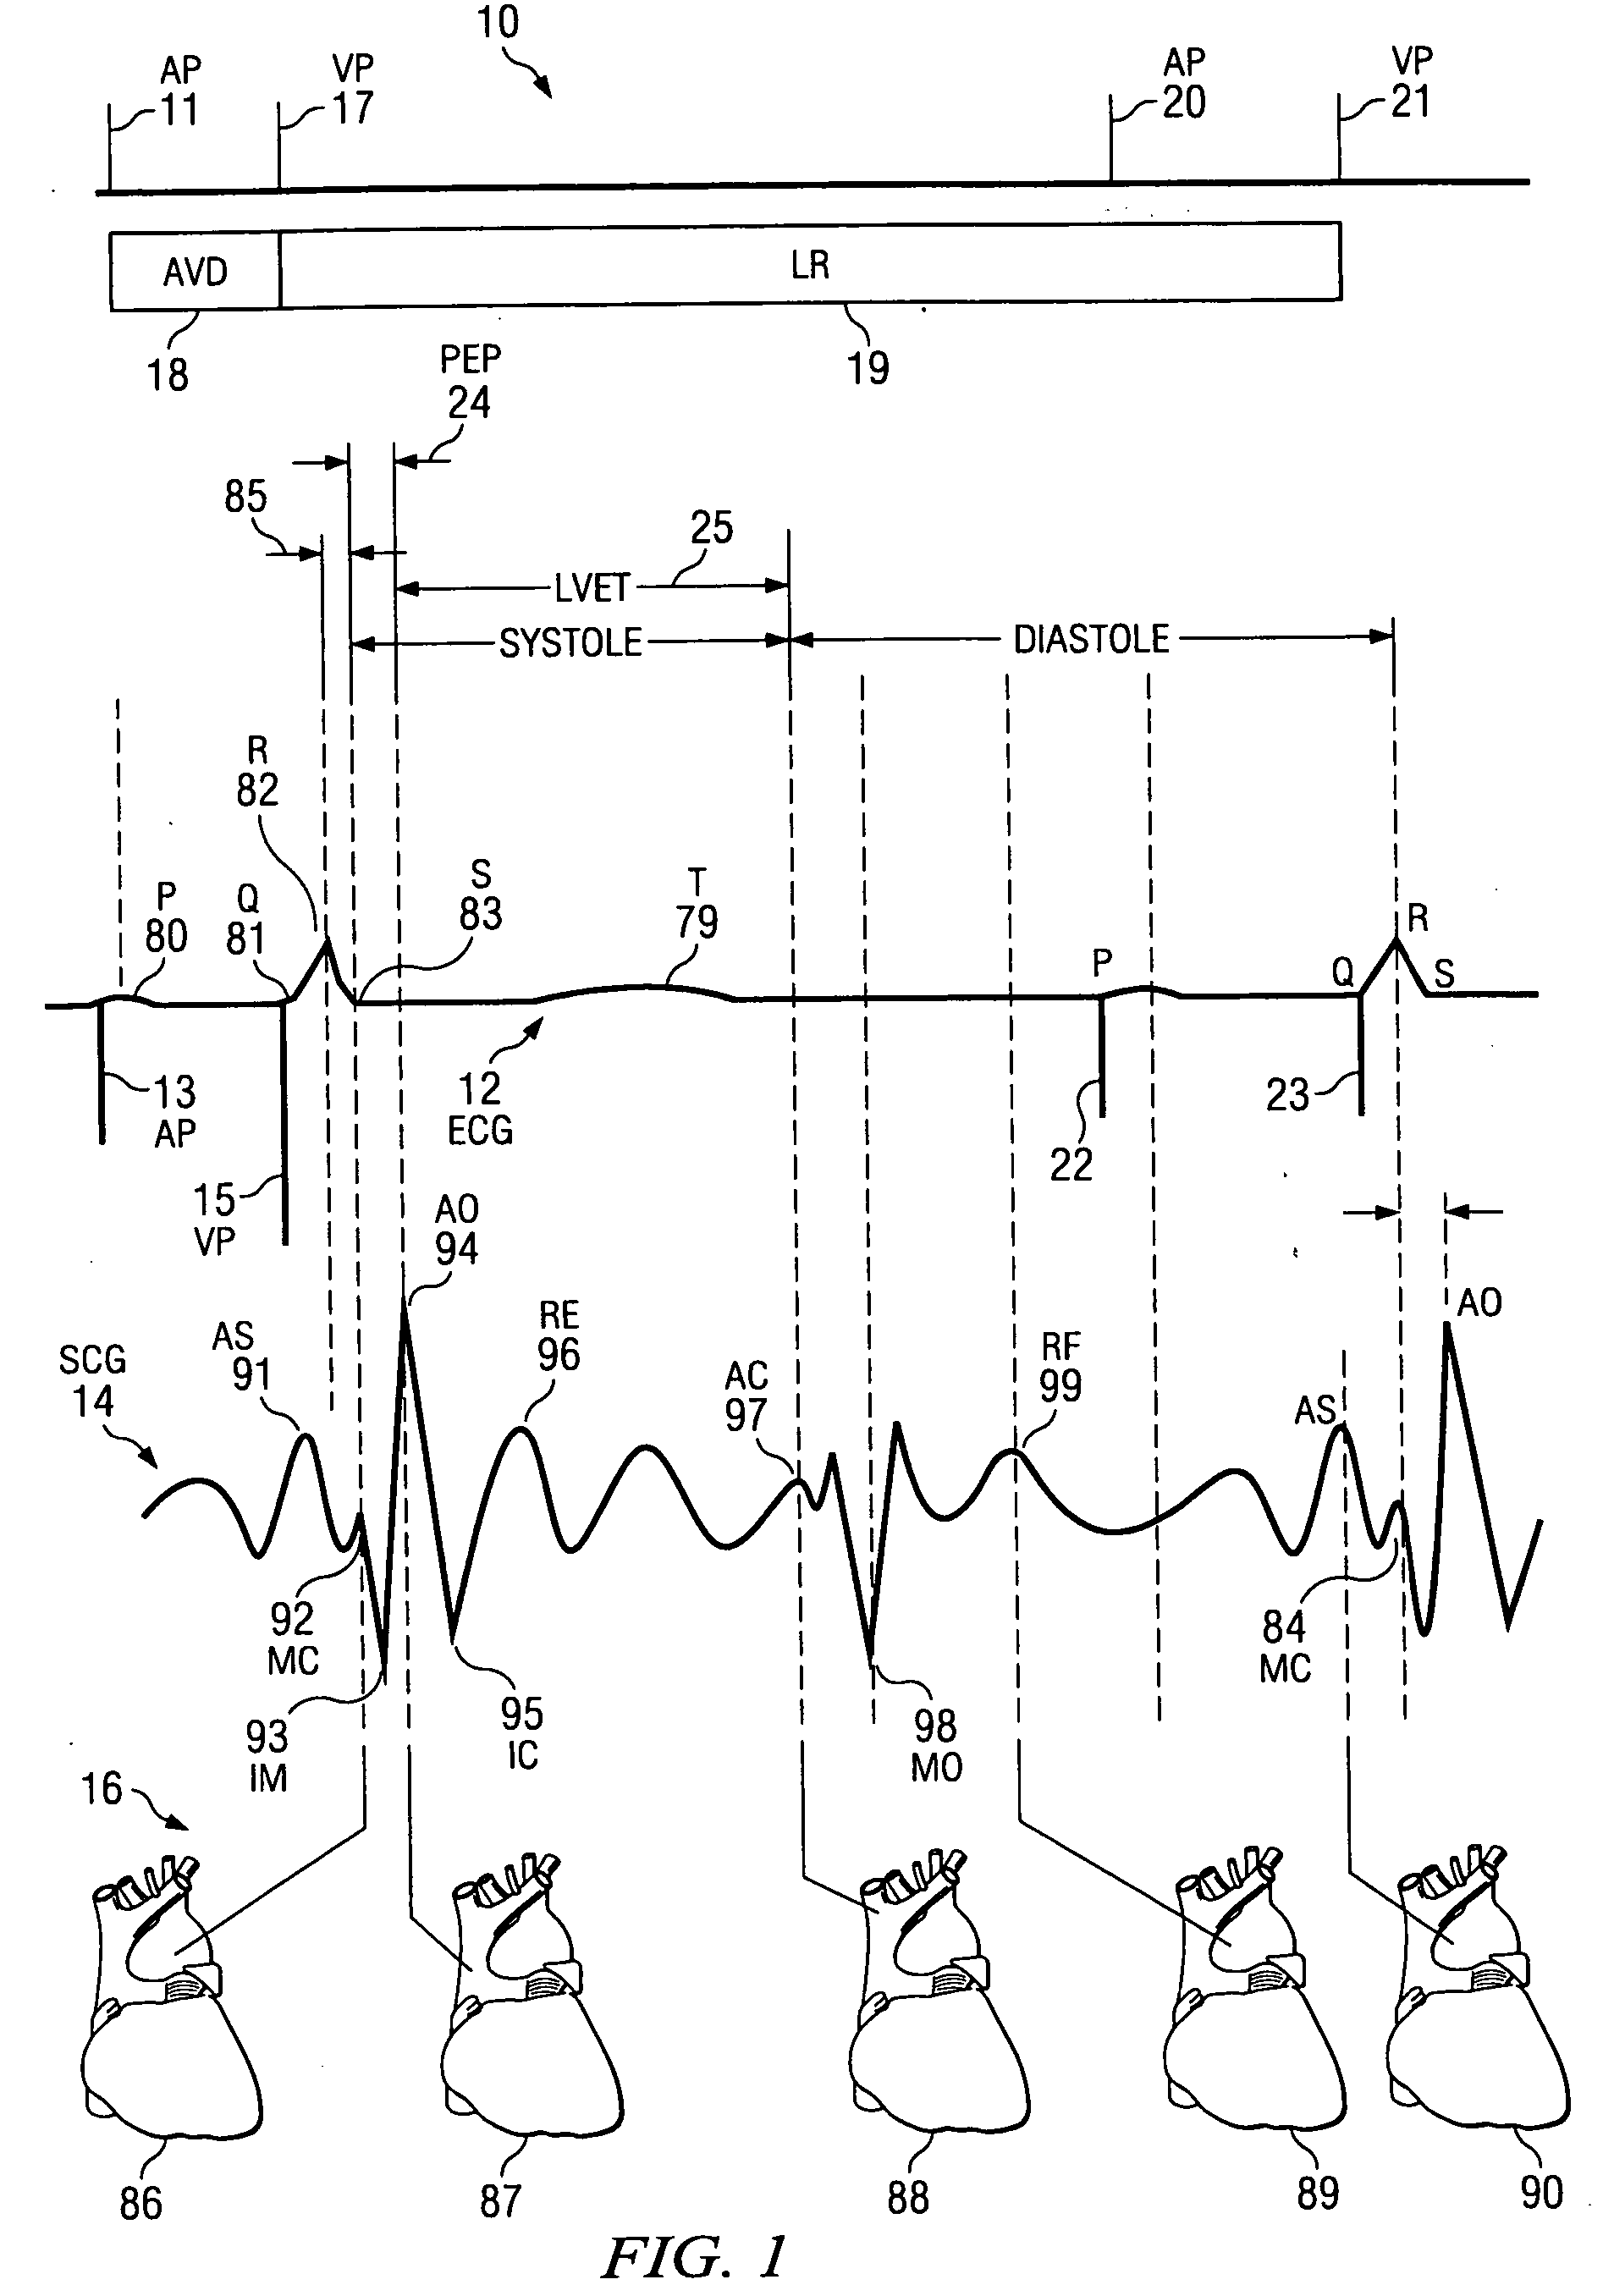 Accelerometer-based method for cardiac function and therapy assessment